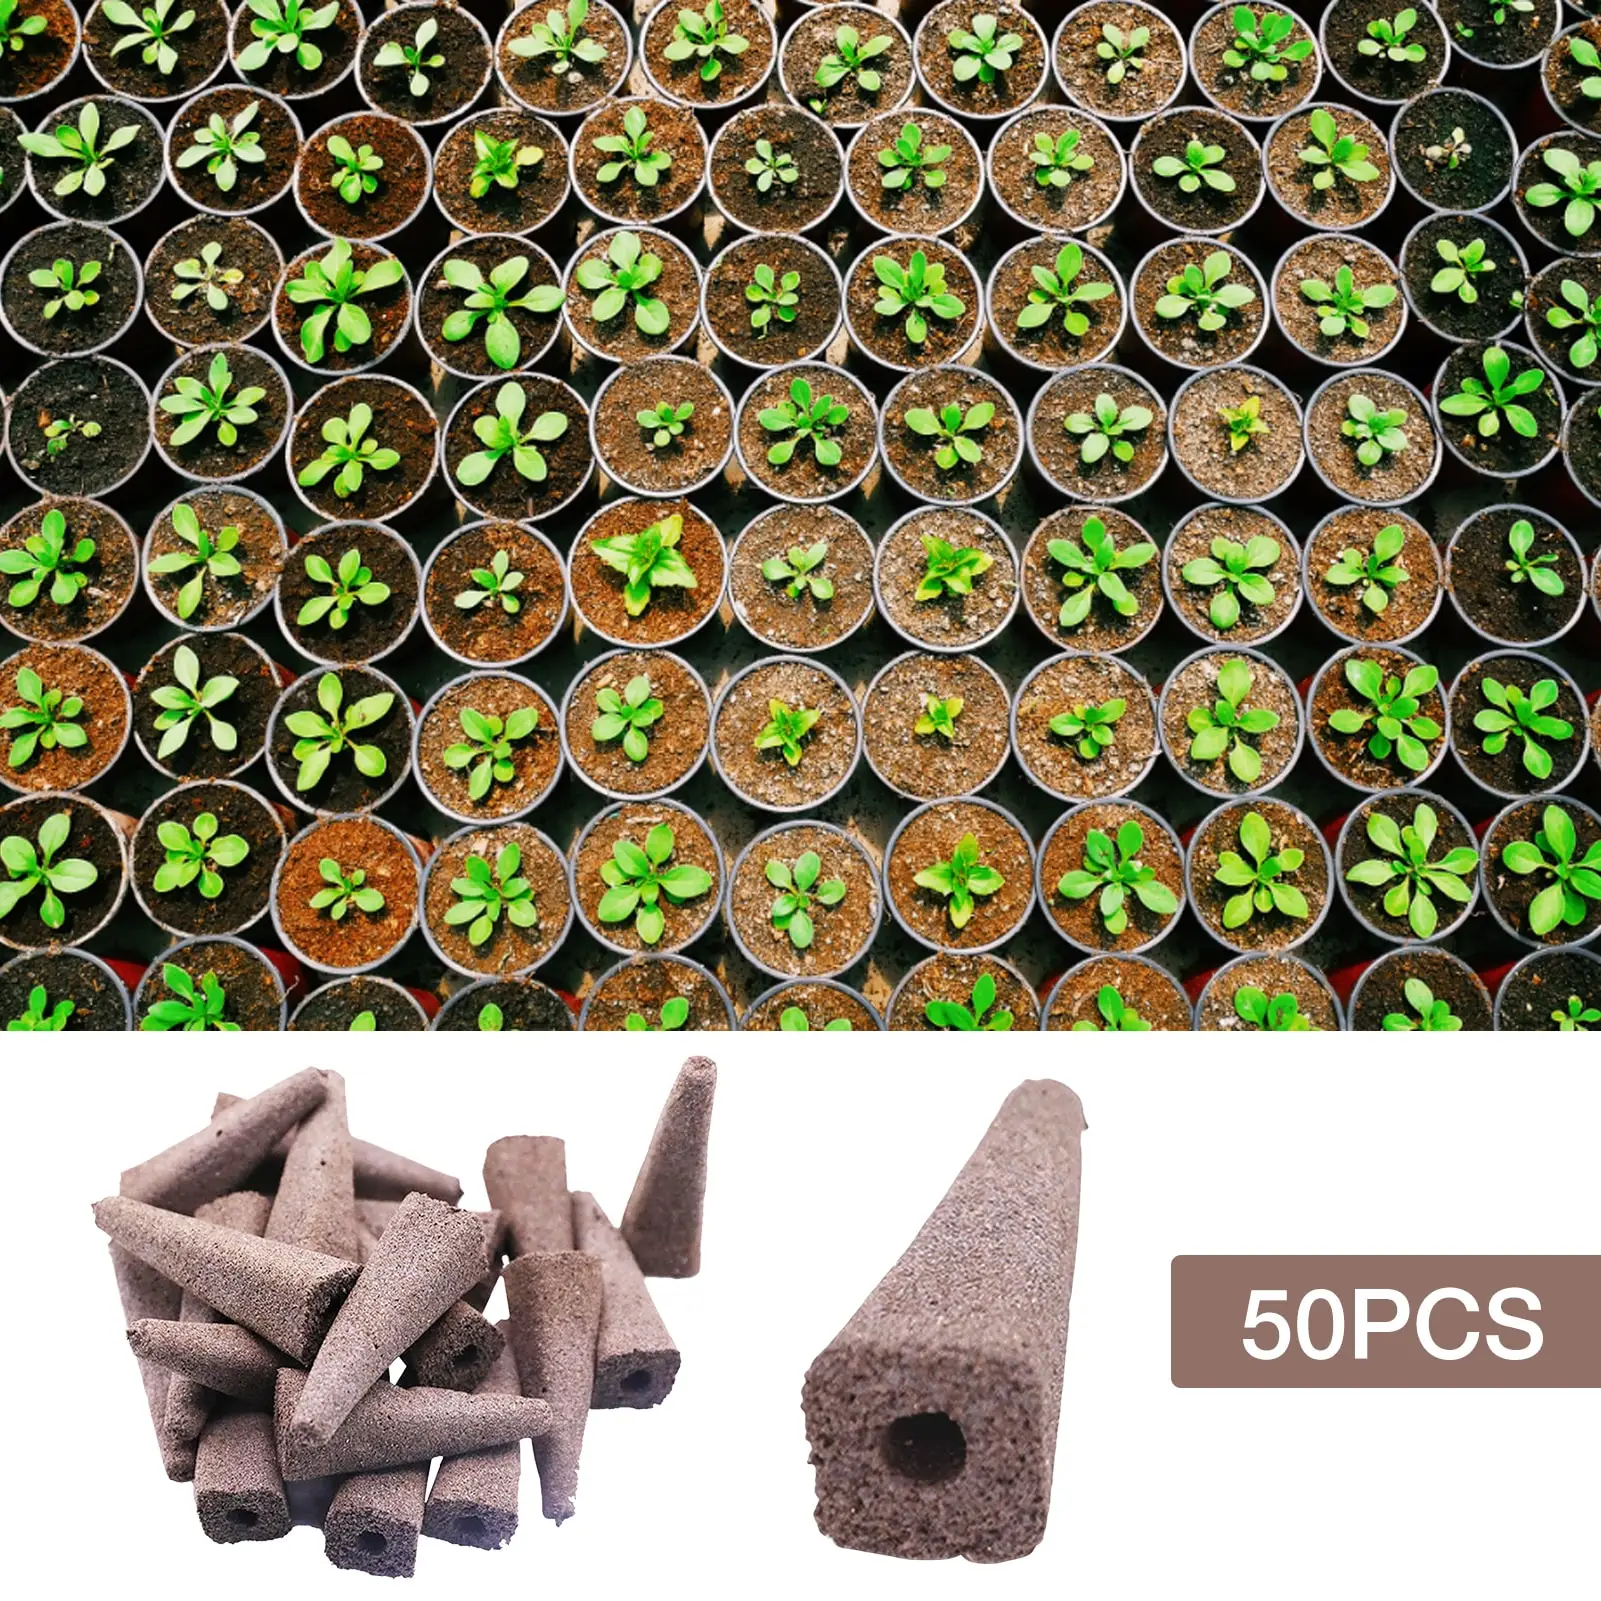 

50pcs Grow Sponges Seed Starter Pods Garden Planting Replacement Root Growth Sponges Plug Seed Hydroponic Growing